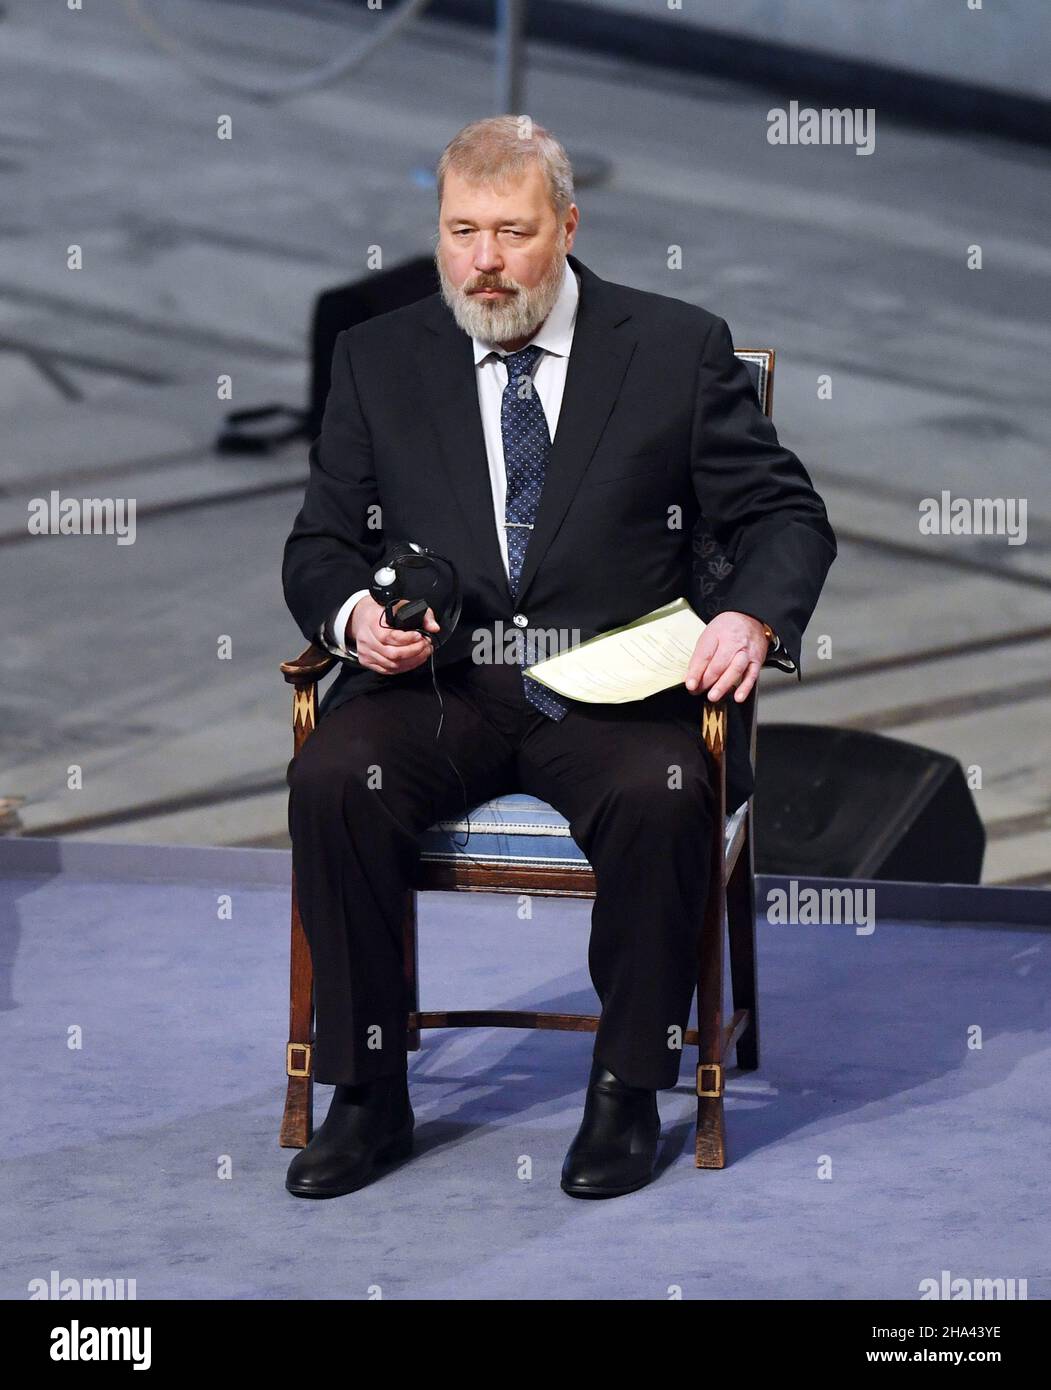 Oslo, Norway. 10th Dec, 2021. Nobel Peace Prize laureates Russian journalist Dmitry Muratov attends the Nobel Peace Prize Award Ceremony at City Hall in Oslo on December 10, 2021. Photo by Rune Hellestad/ Credit: UPI/Alamy Live News Stock Photo